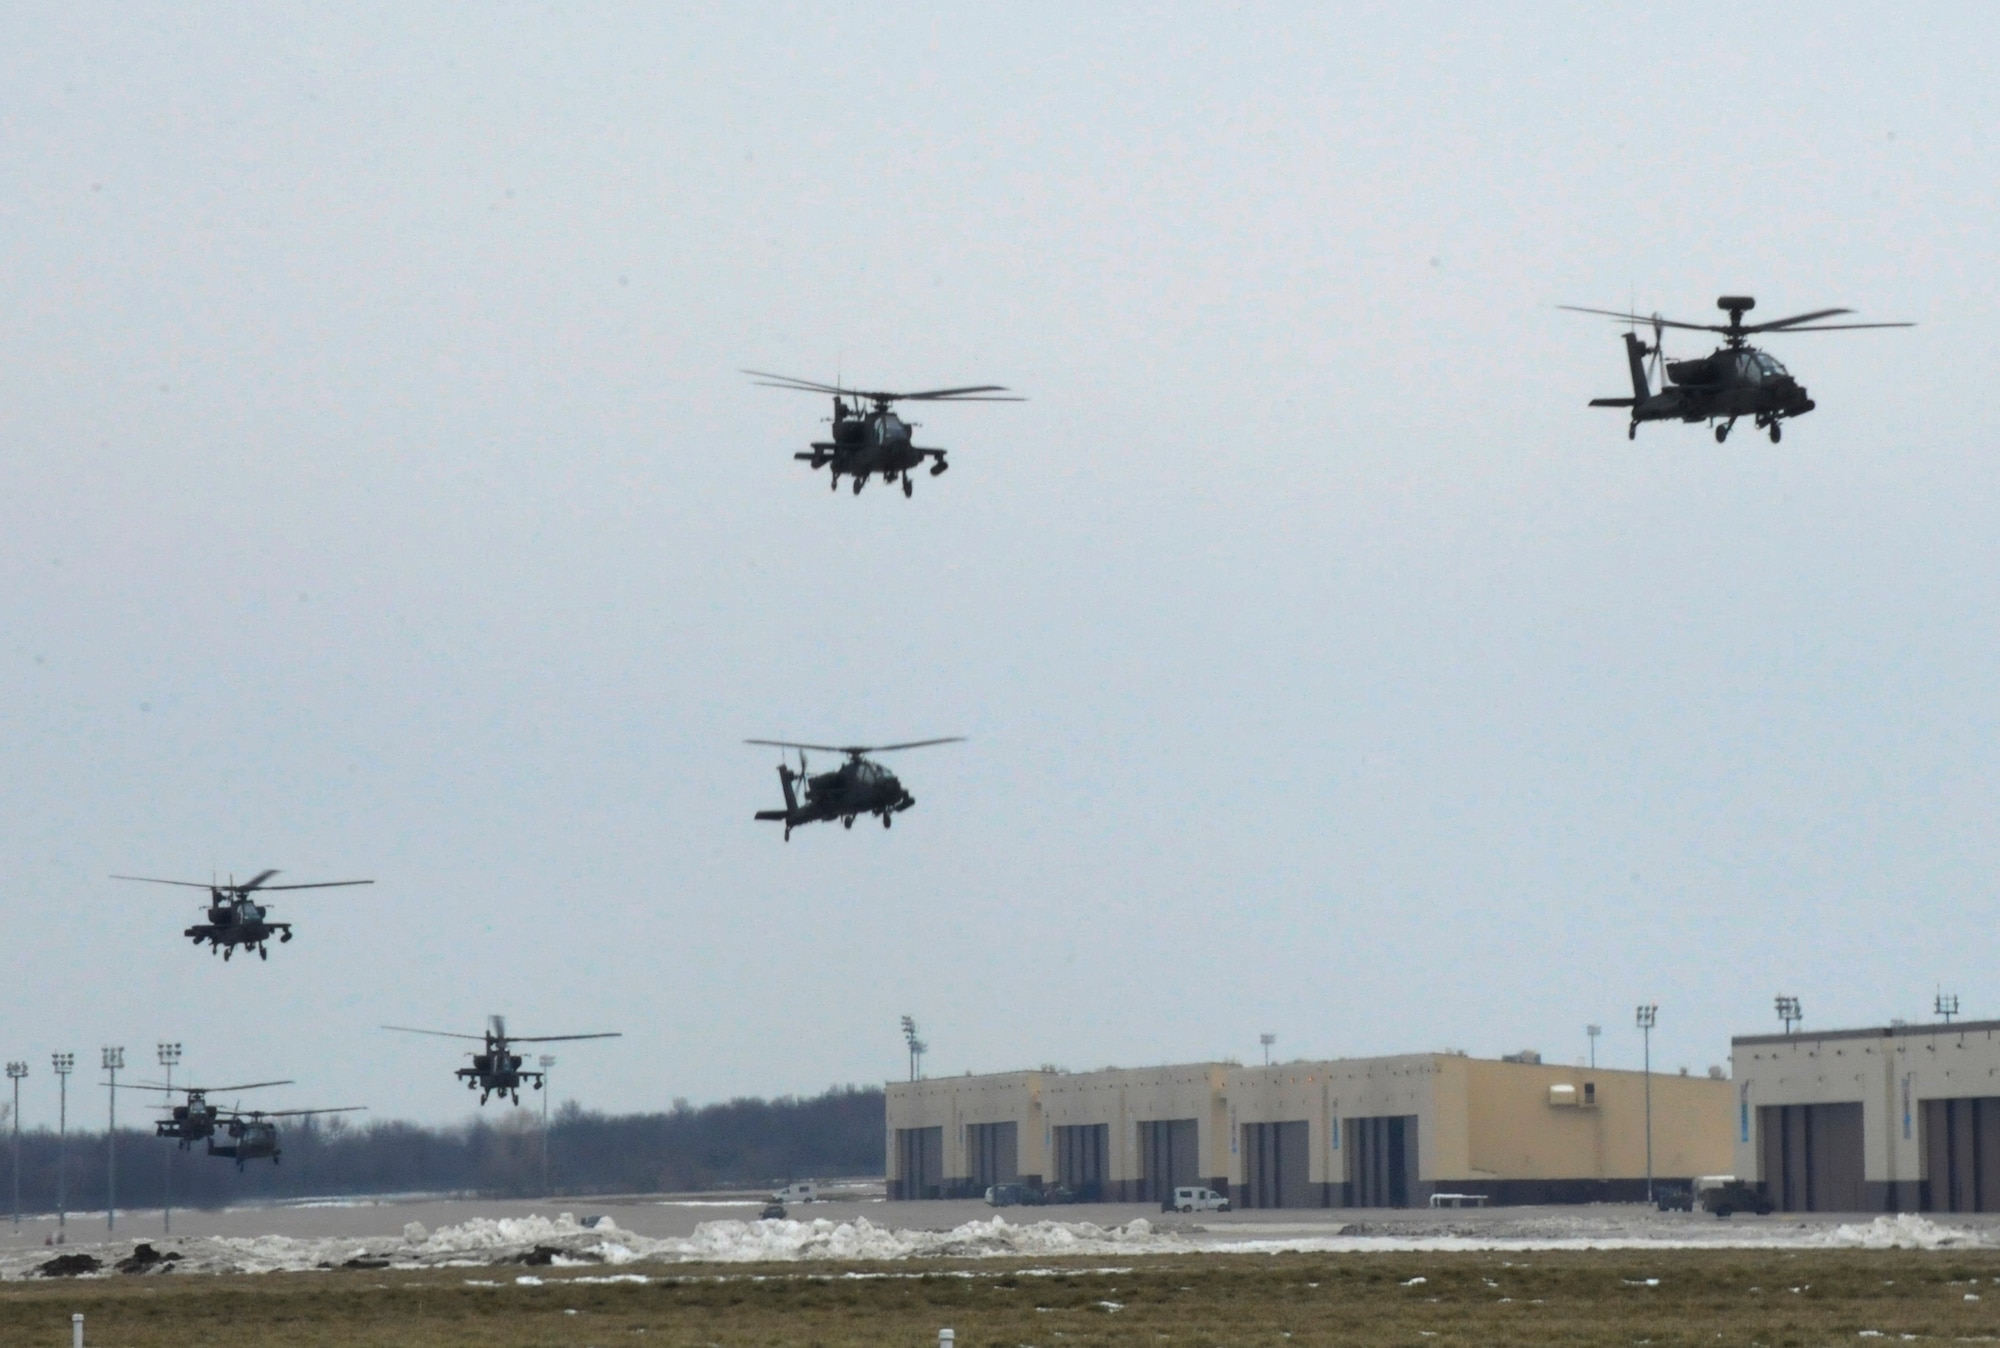 U.S. Army AH-64 Apache Longbows from the 1-135th Attack Reconnaissance Battalion at Whiteman Air Force Base, Mo., leave March 27, 2013, for their deployment to Afghanistan. More than 300 Soldiers from the 1-135th ARB deployed with the aircraft. (U.S. Air Force photo by Airman 1st Class Shelby R. Orozco/Released)